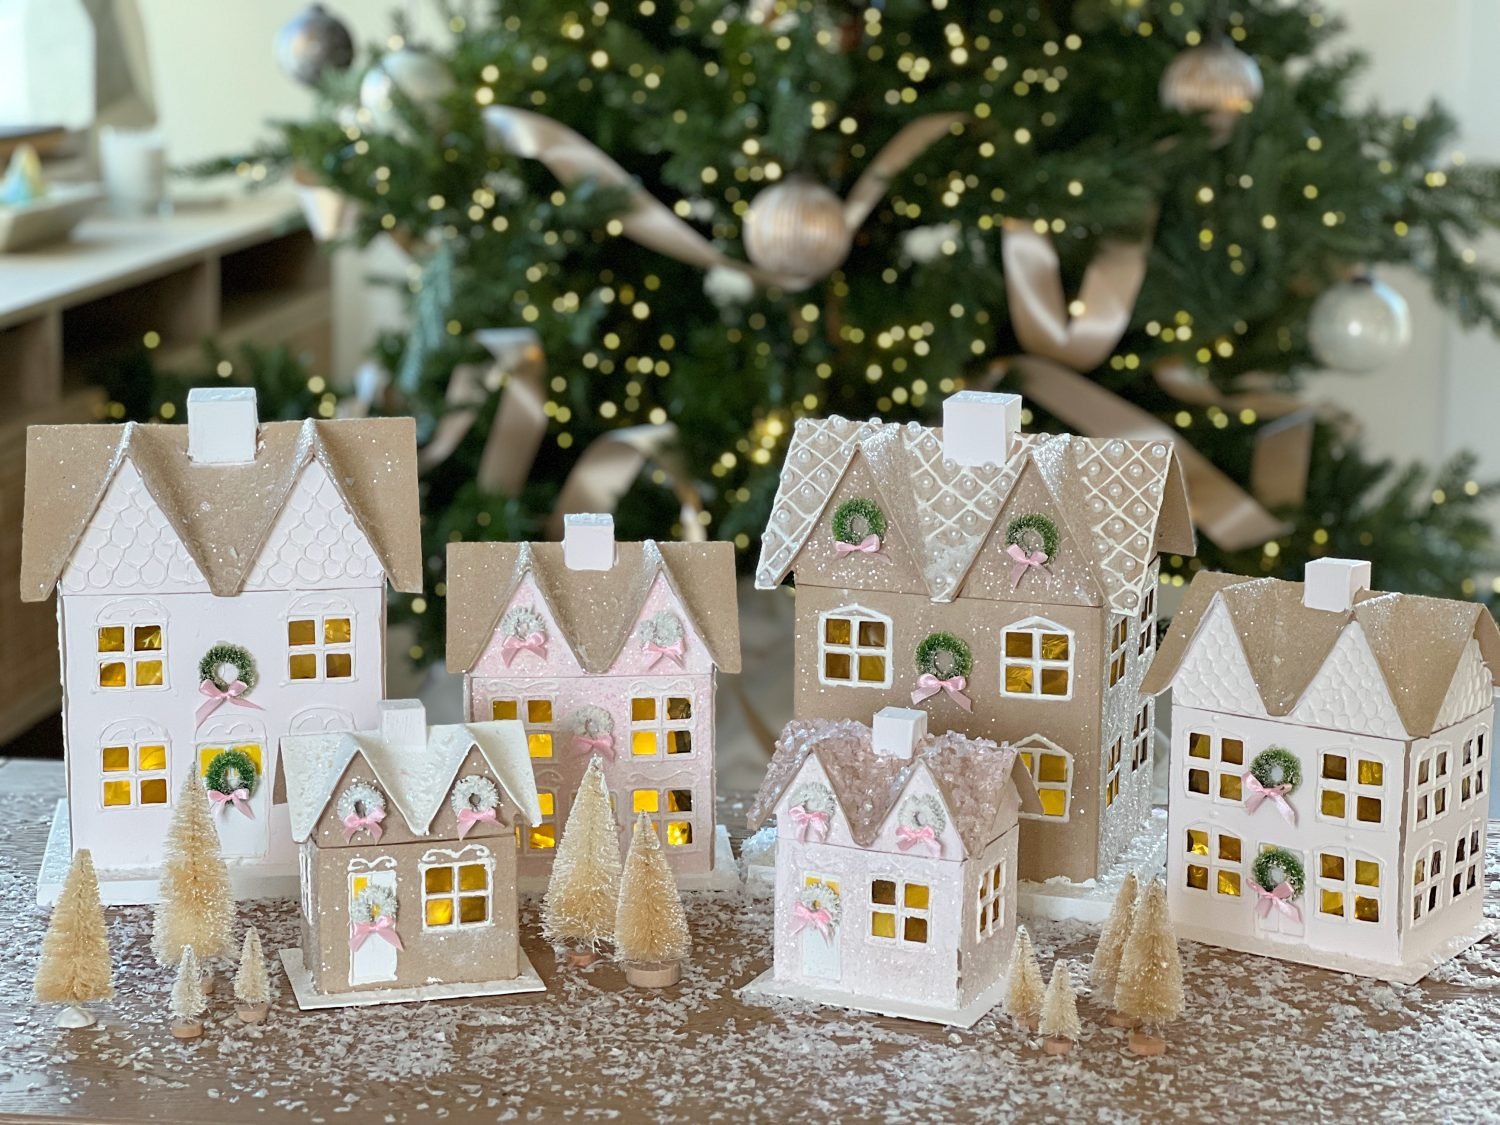 Easy Christmas Craft: Faux Gingerbread House with Puff Paint